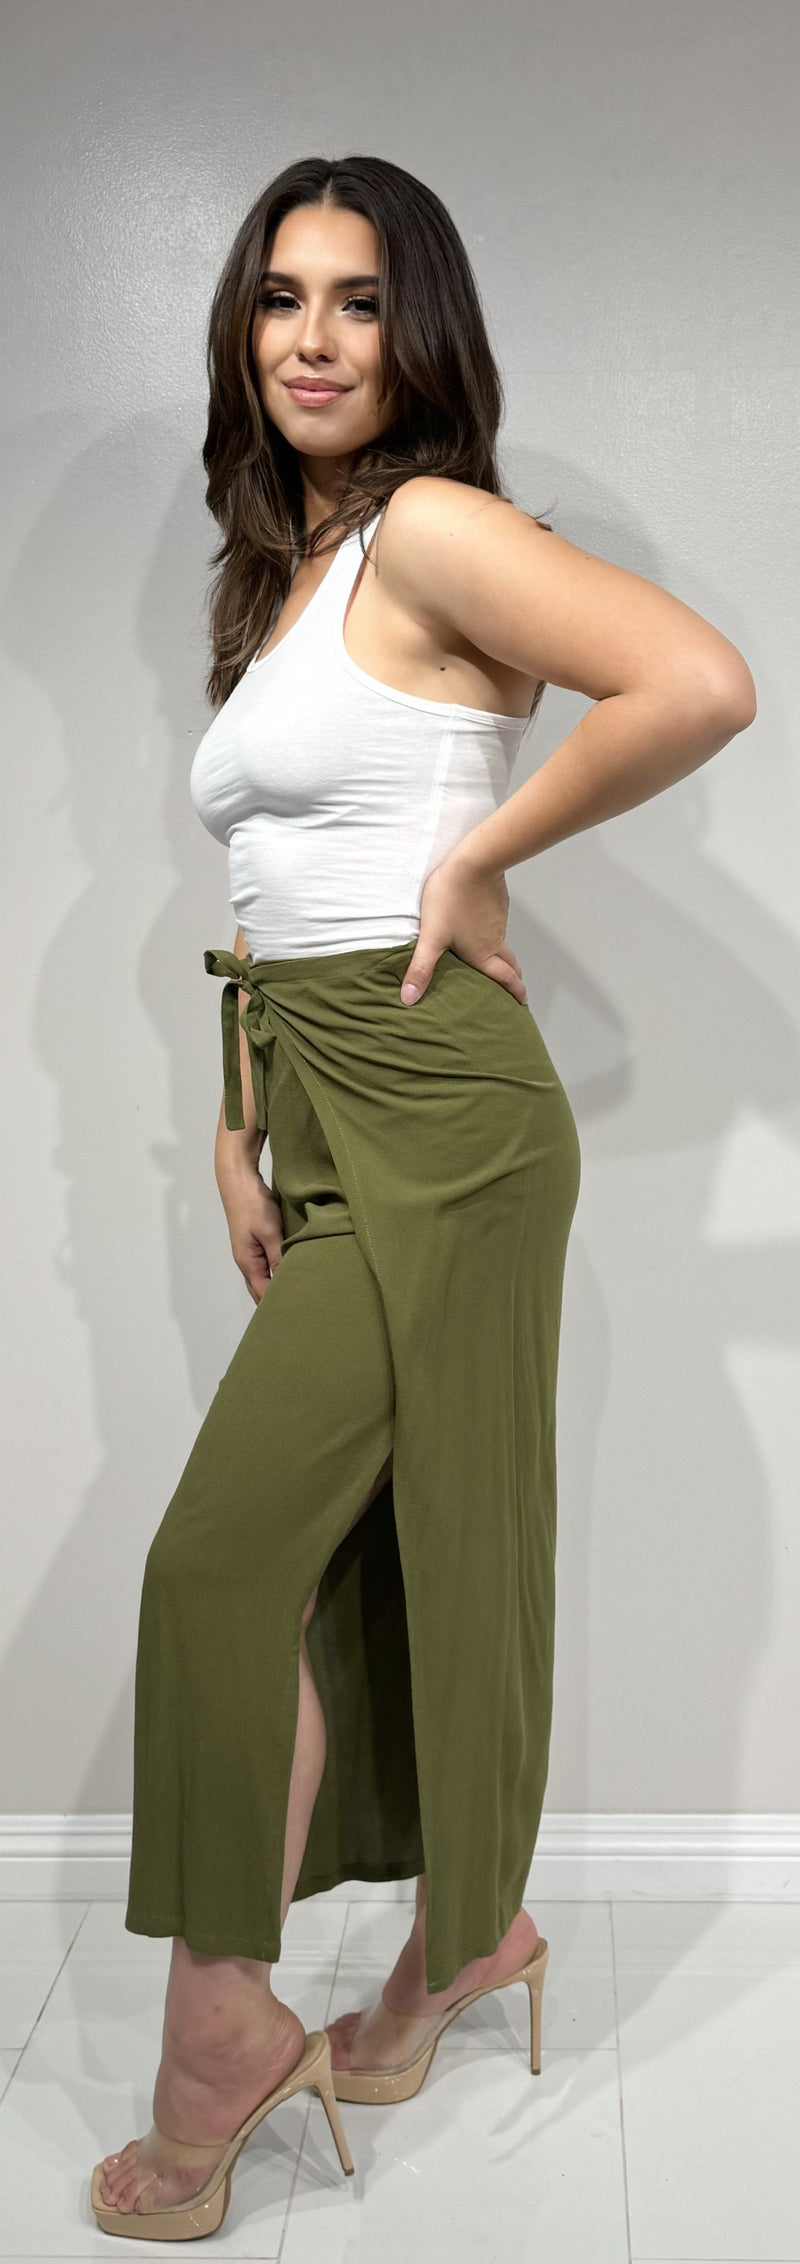 Jeans Warehouse Hawaii - SOLID WOVEN PANTS - PETAL FRONT WIDE LEG PANTS | By LLOVE, INC.